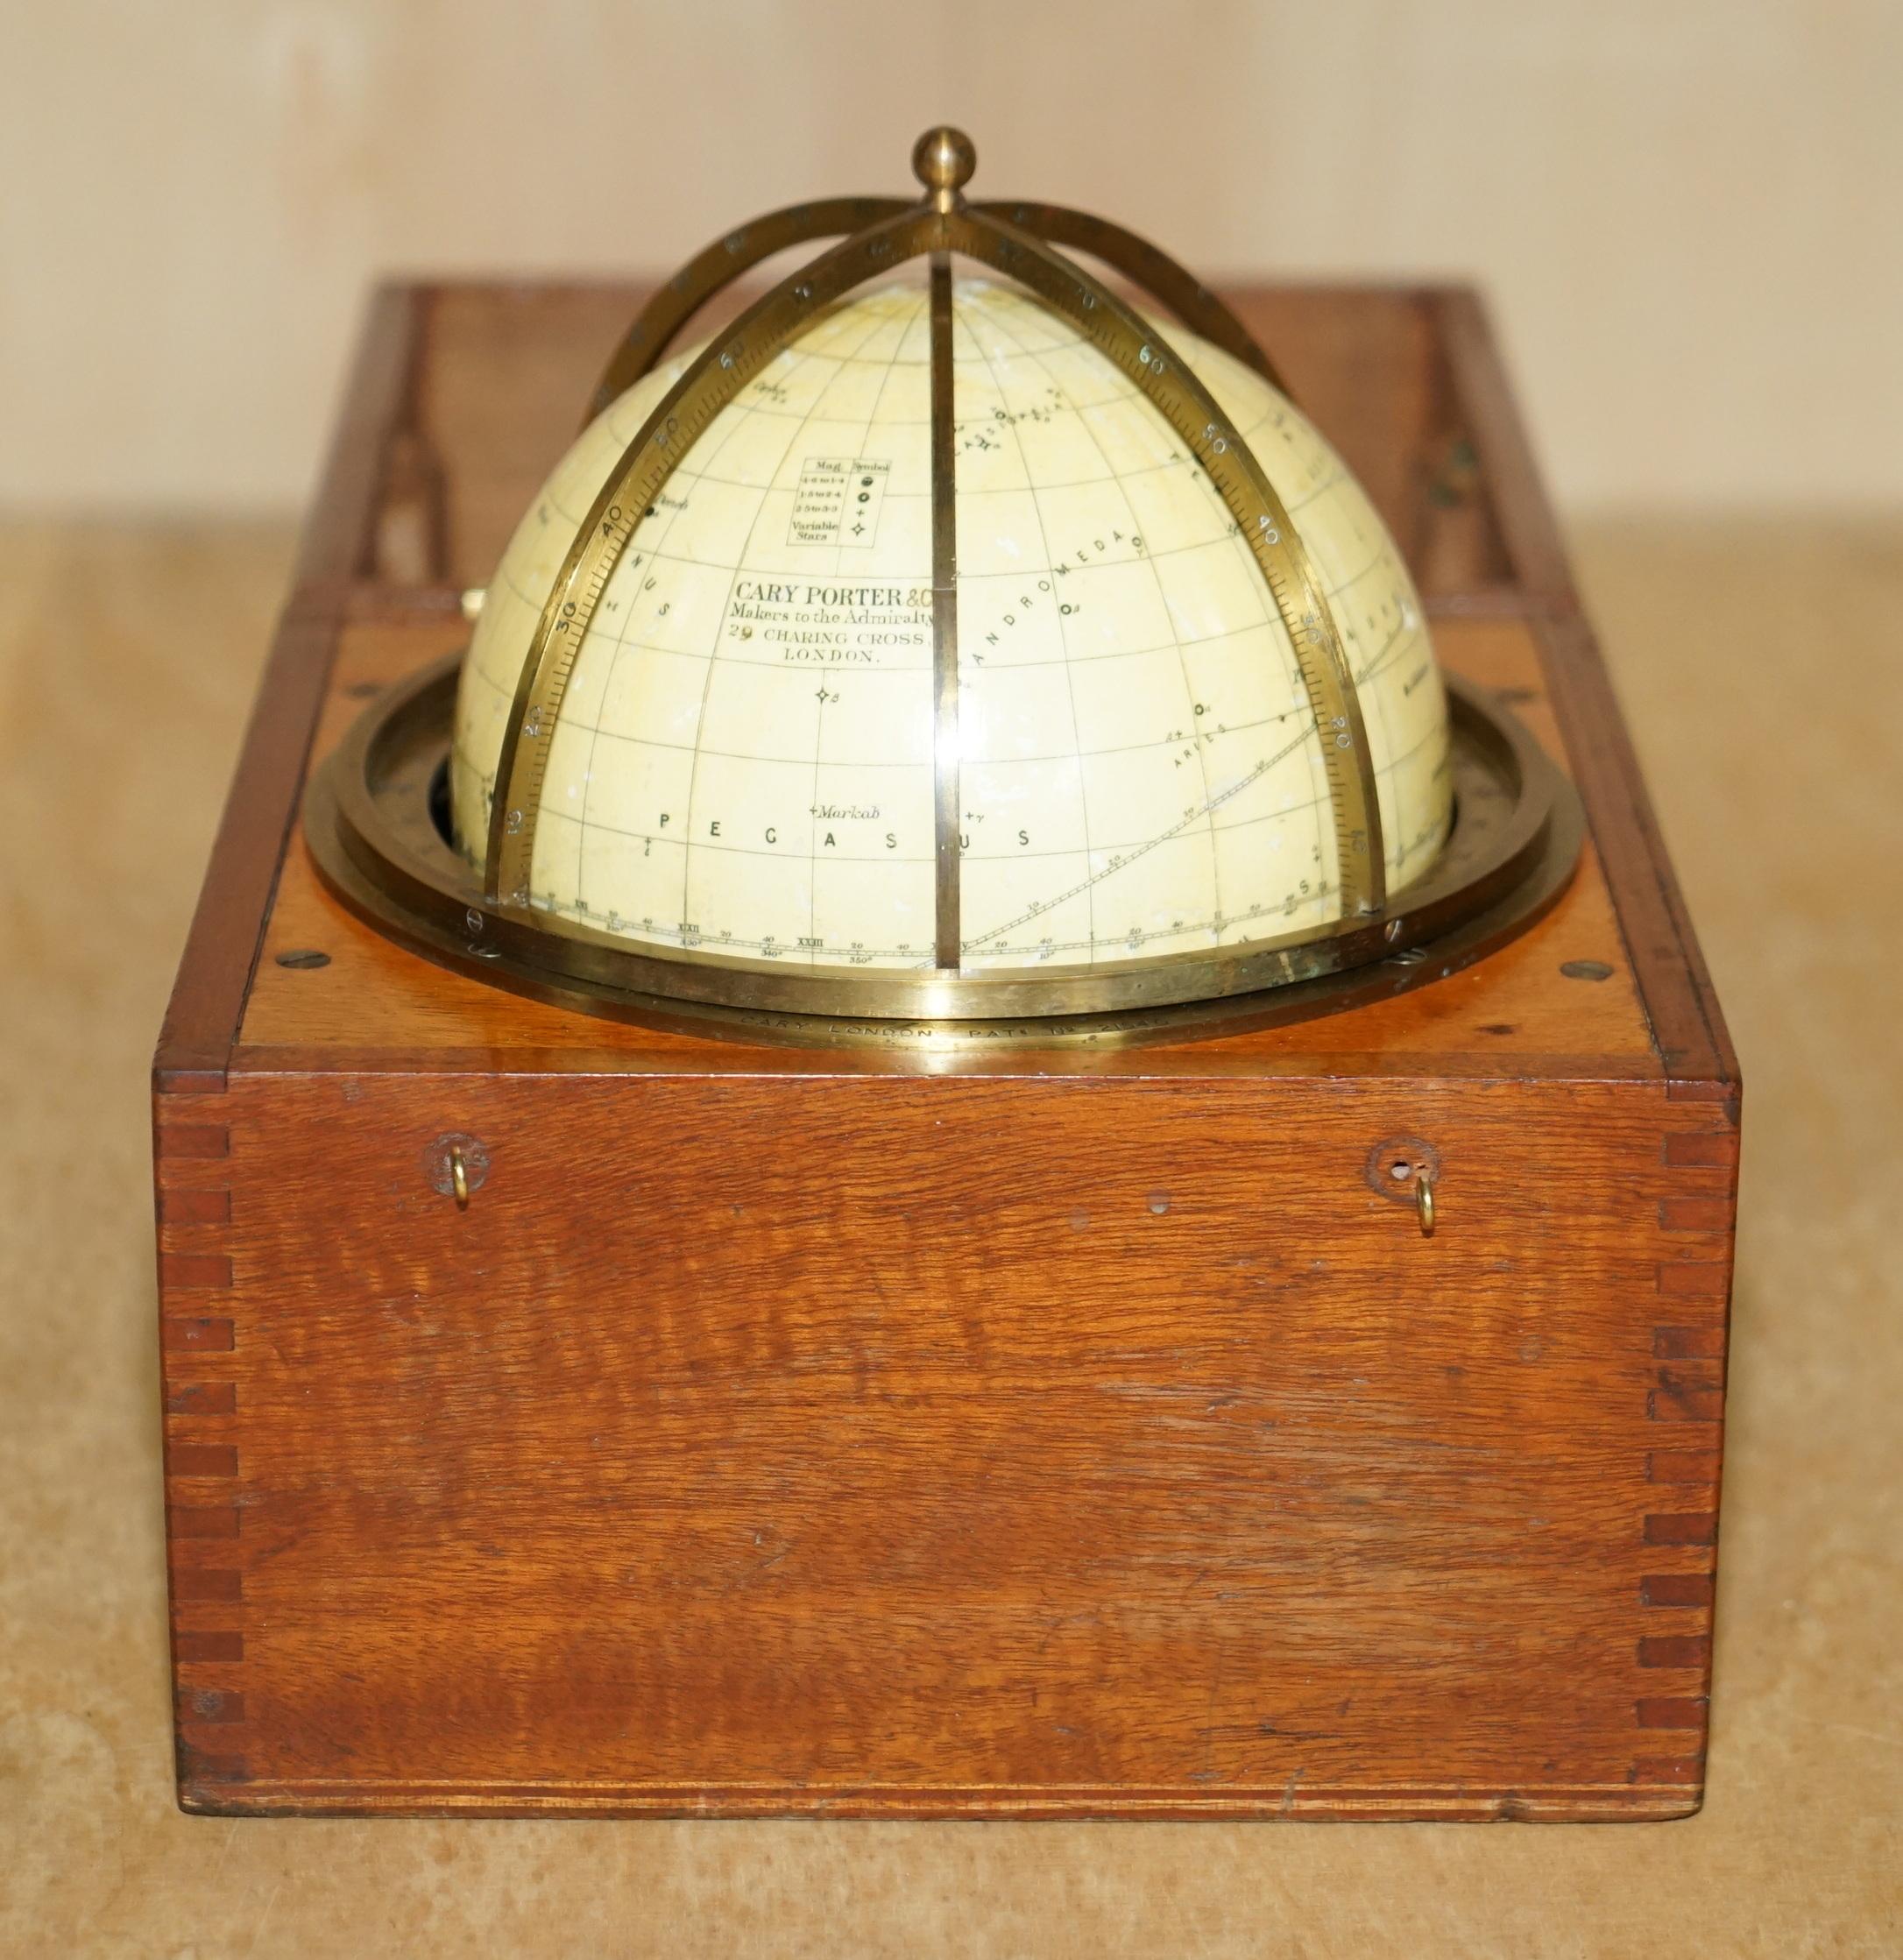 Hand-Crafted John Cary Travel Celestial Globe in Box Marked Cary & Co London, No. 21540